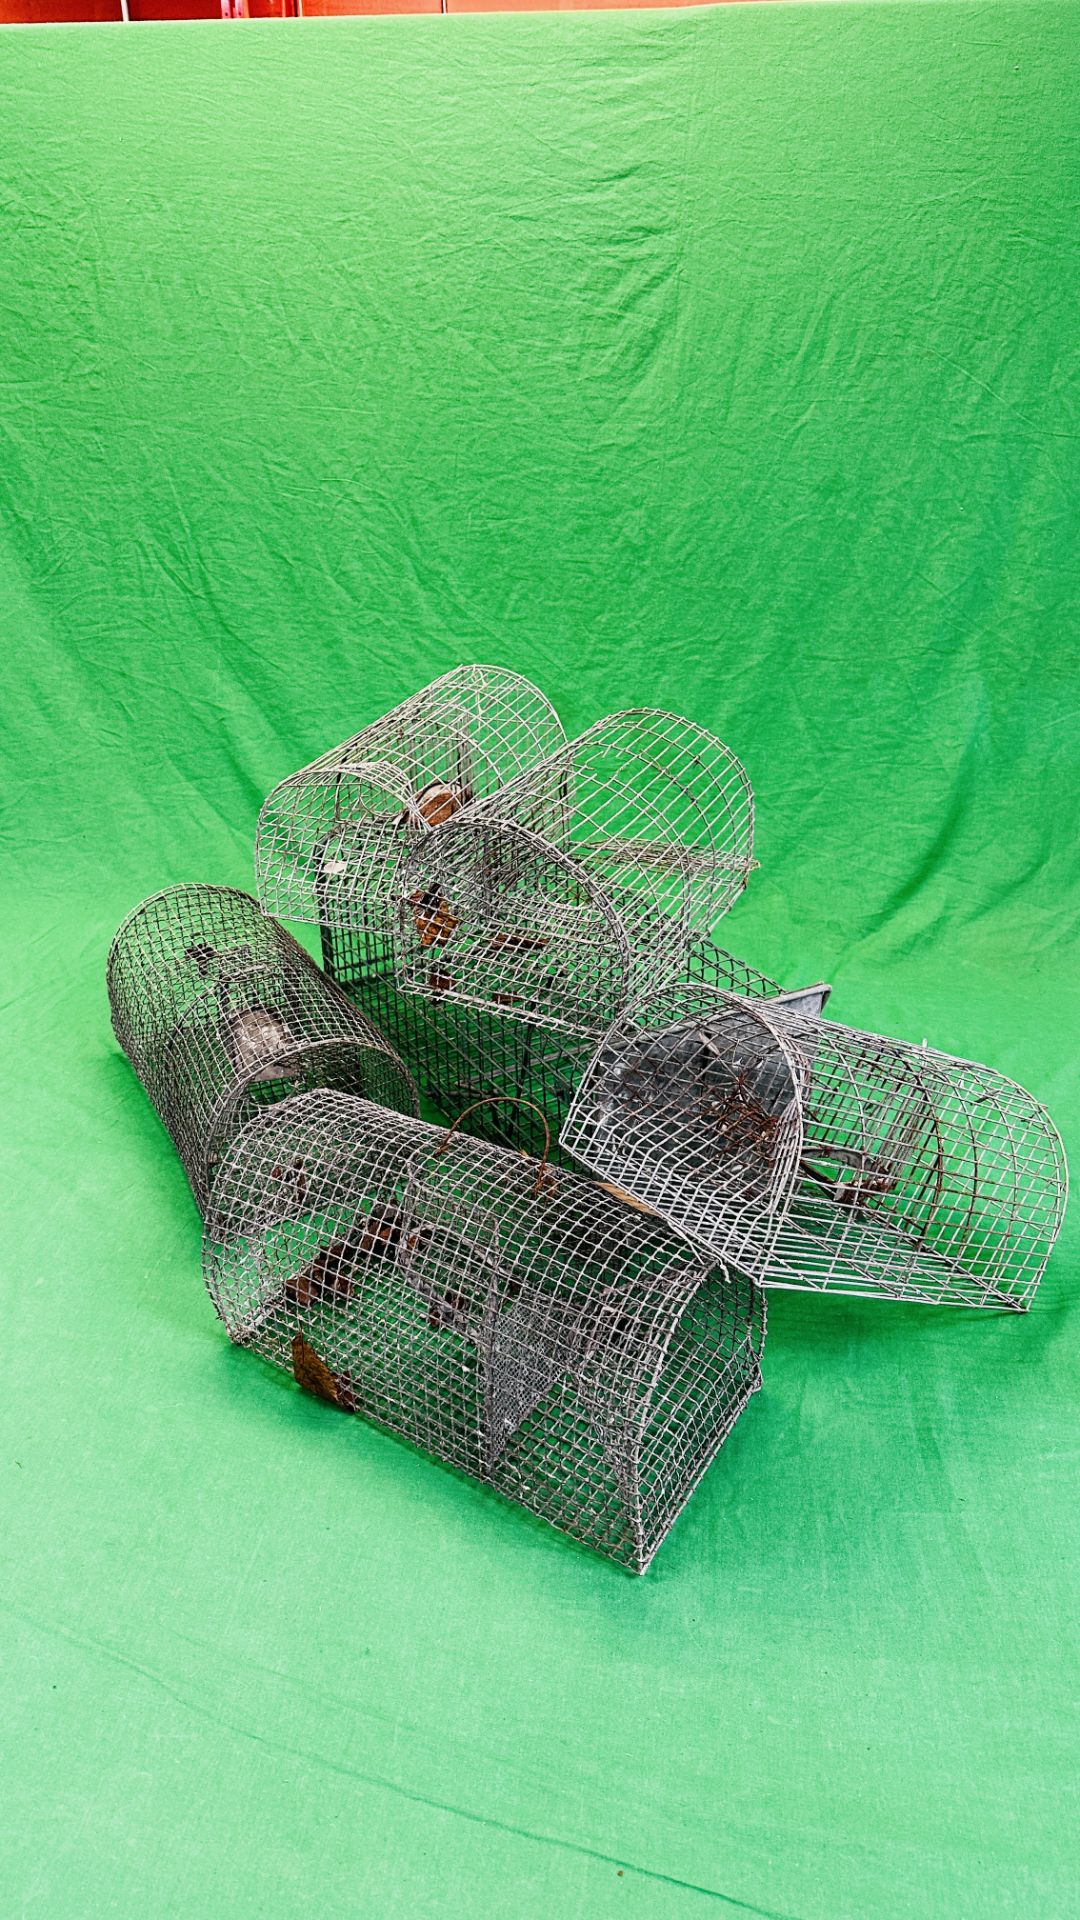 A GROUP OF FIVE HUMANE TRAPS